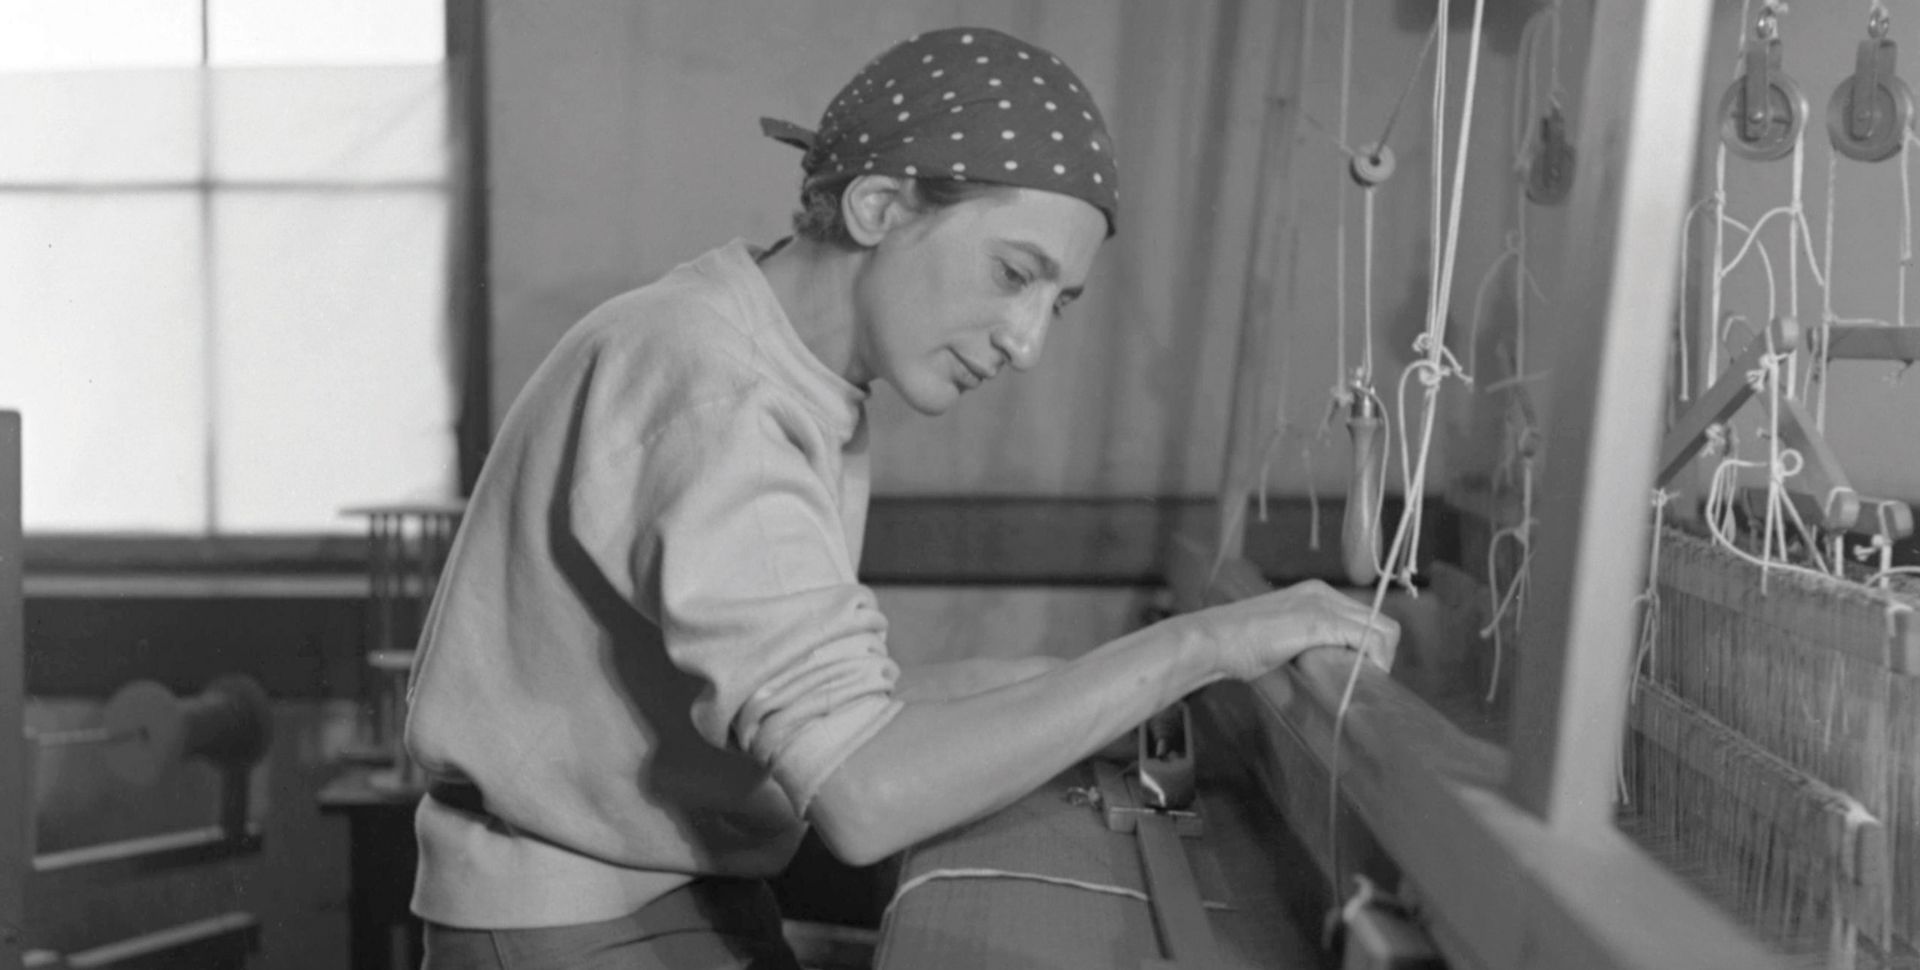 Anni Albers in 1937, at Black Mountain College, North Carolina (below); she had fled Nazi Germany four years earlier with her husband, Josef Albers: © The Josef and Anni Albers Foundation, 2018